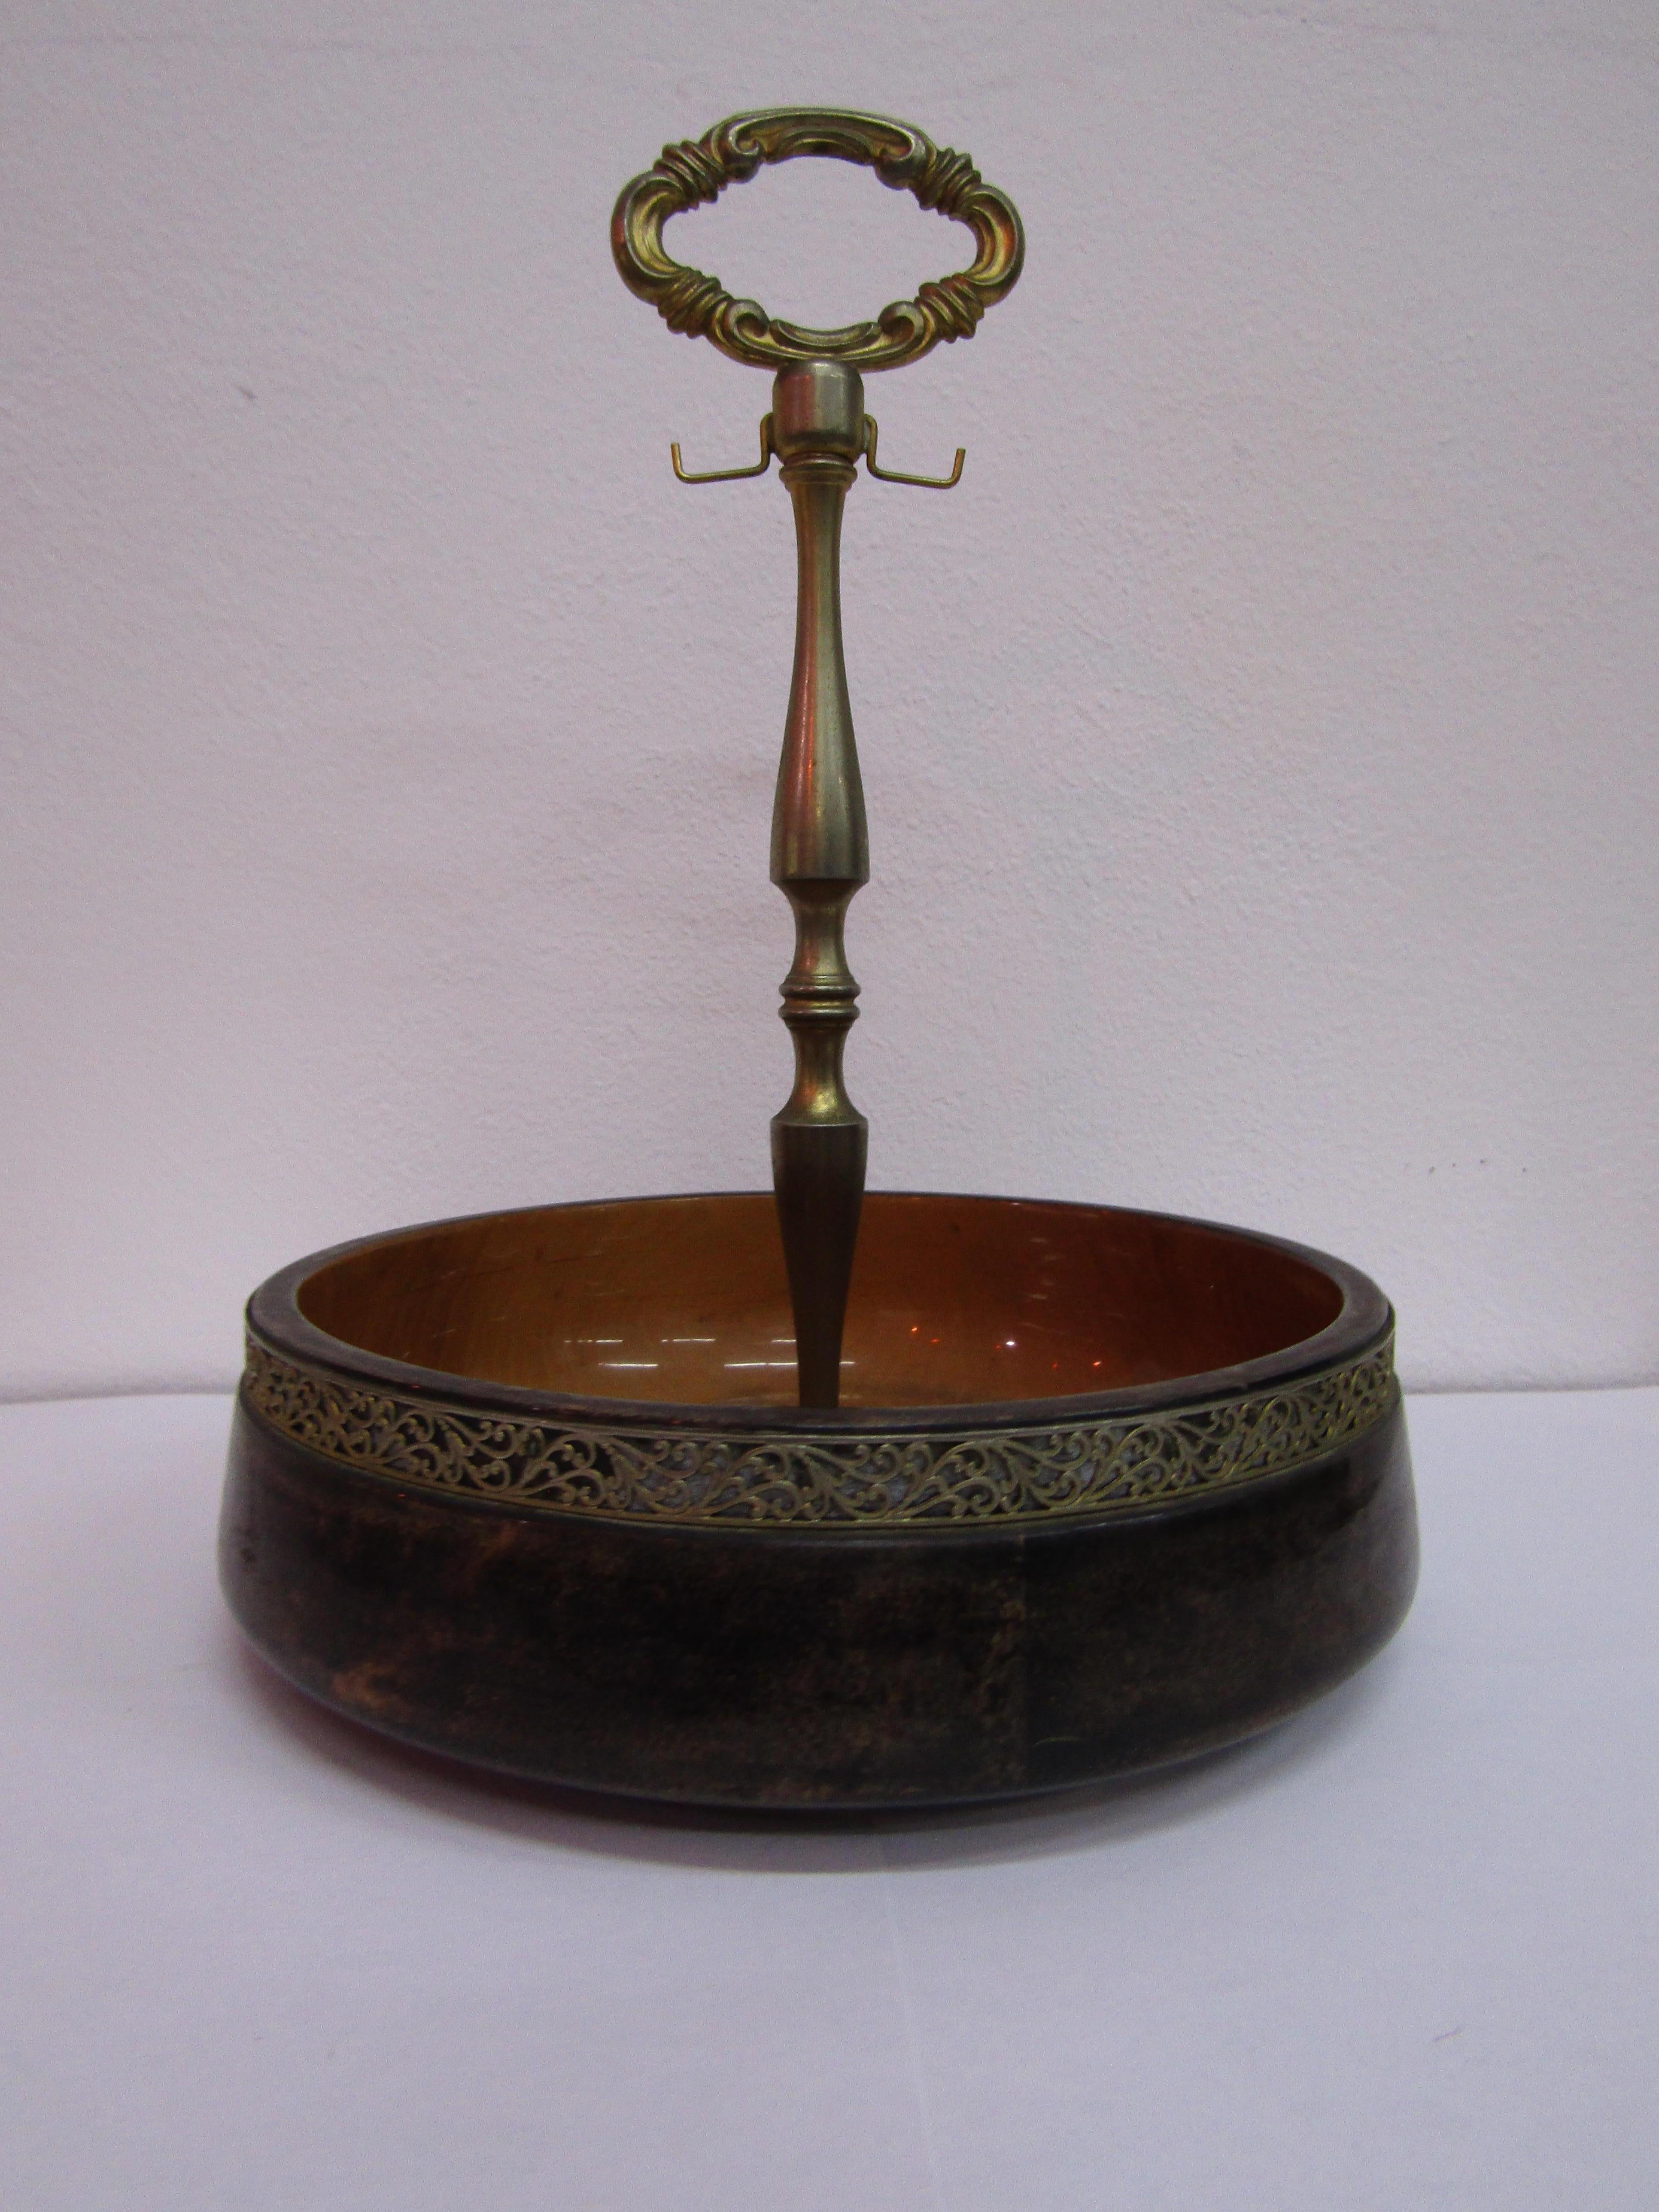 
Parchment wood bowl with handle and strip surrounding the brass bowl. The bowl still contains its original label (see photo).
The bowl was created by Aldo Tura in Italy in the mid-century period.


Aldo Tura was not an experimental furniture